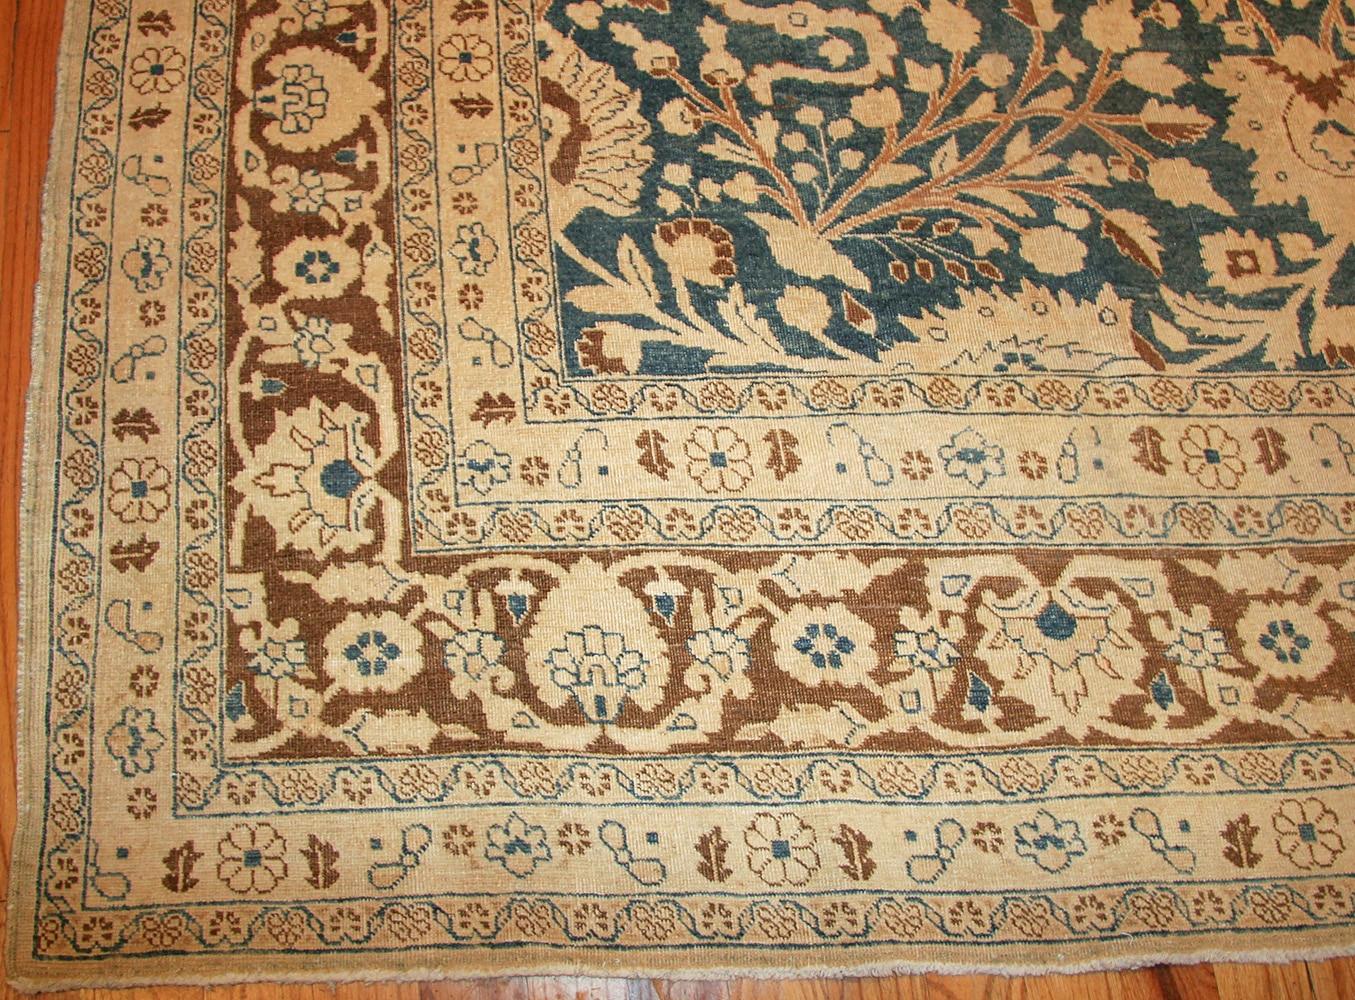 Beautiful and Finely Woven Antique Room Size Persian Khorassan Rug, Country of Origin / Rug Type: Antique Persian Rugs, Circa 1920's. Size: 8 ft 8 in x 10 ft 10 in (2.64 m x 3.3 m)

